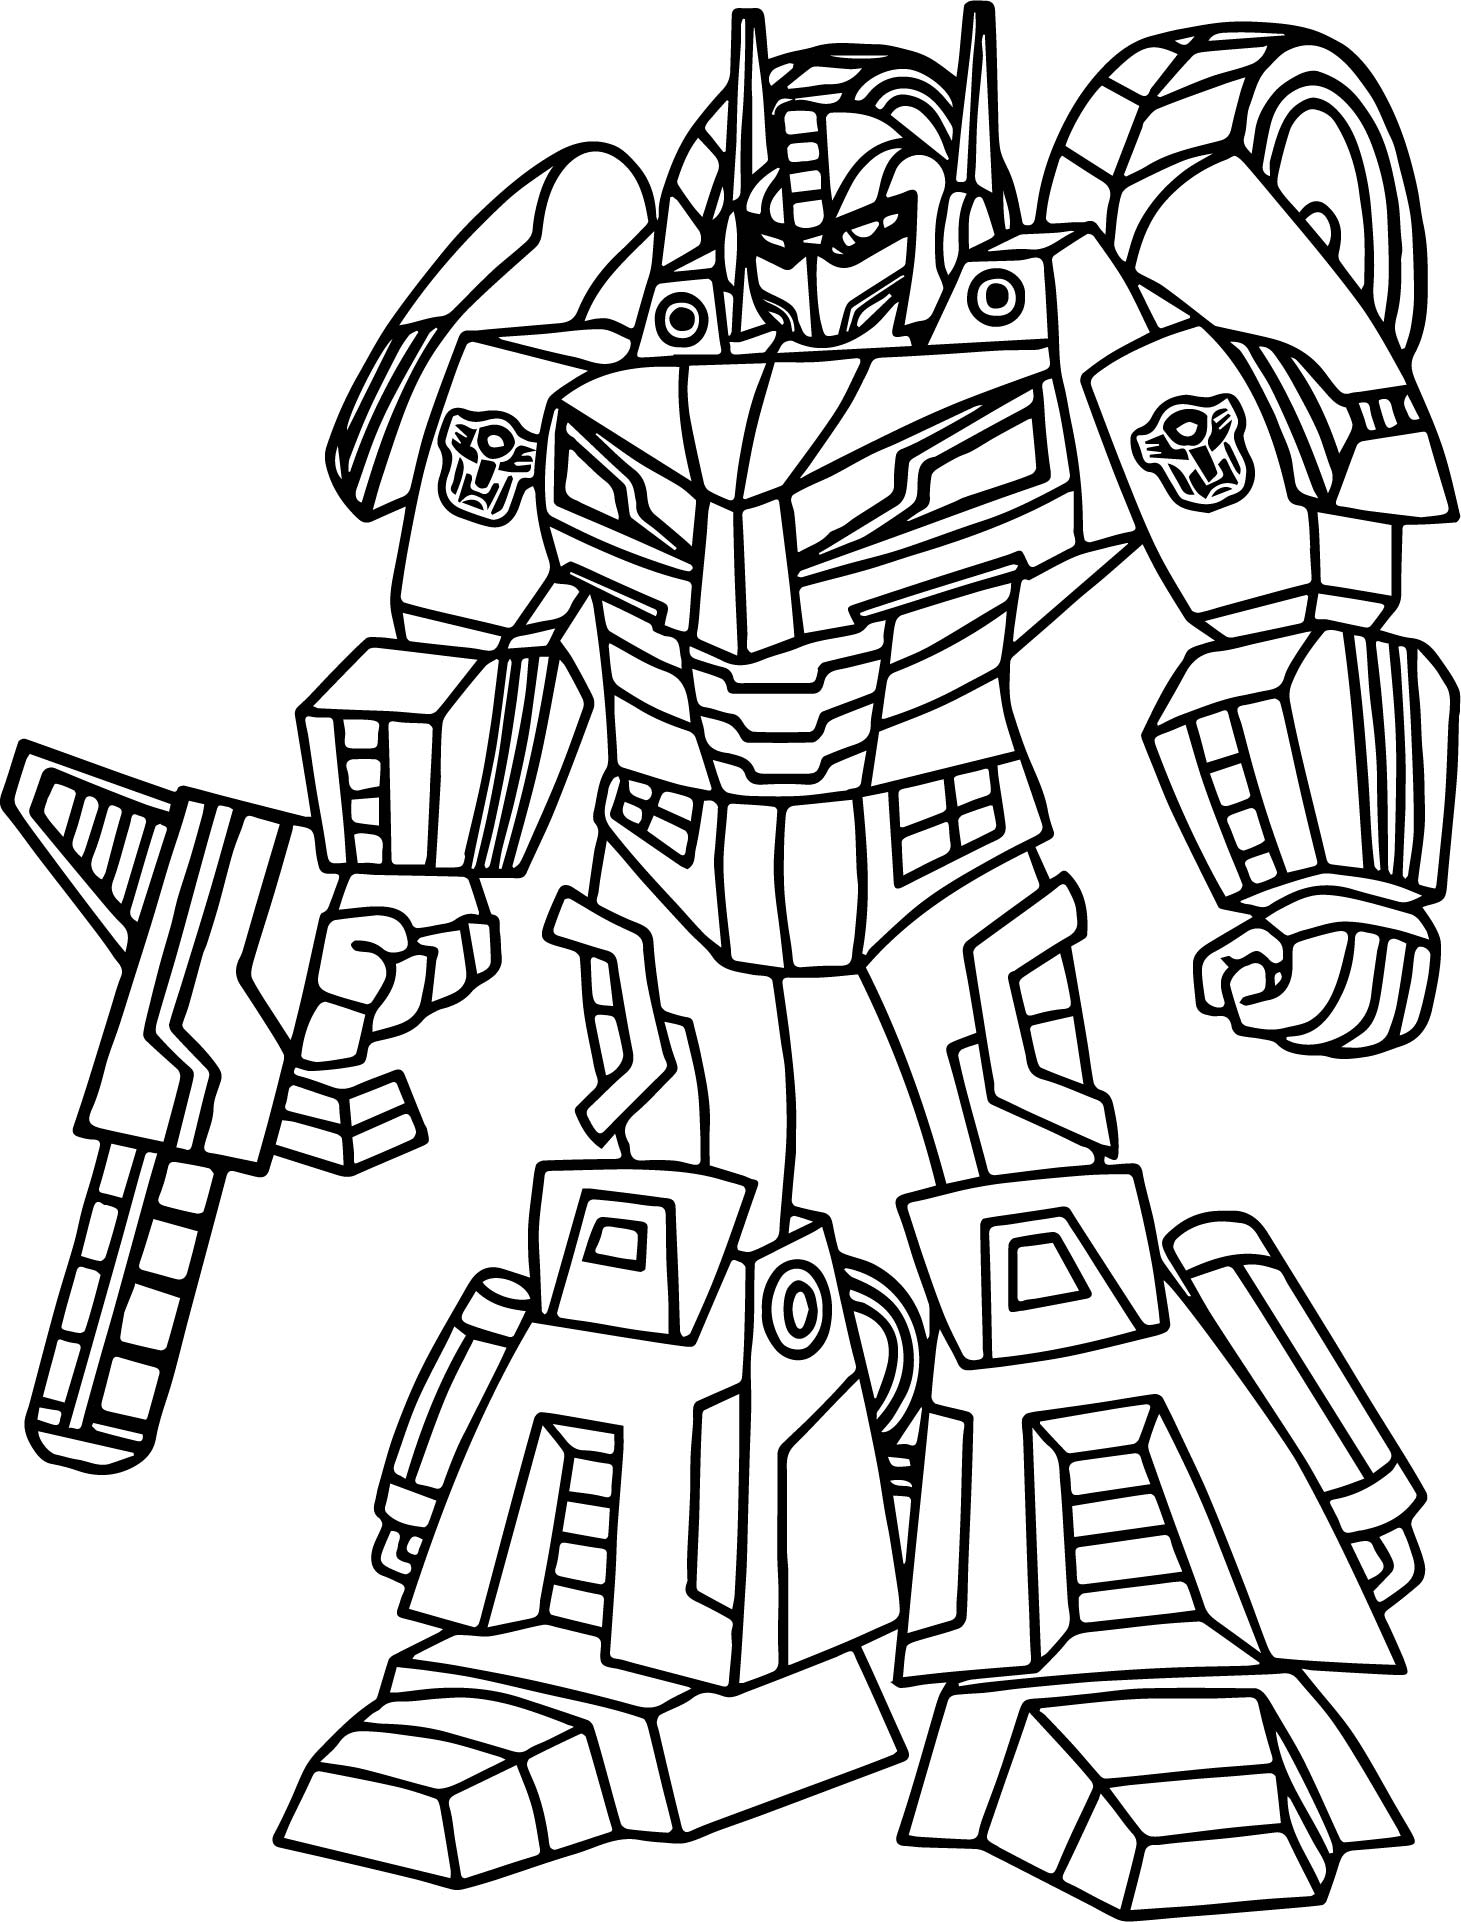 Transformers Dinobots Coloring Pages At Getcolorings.com | Free